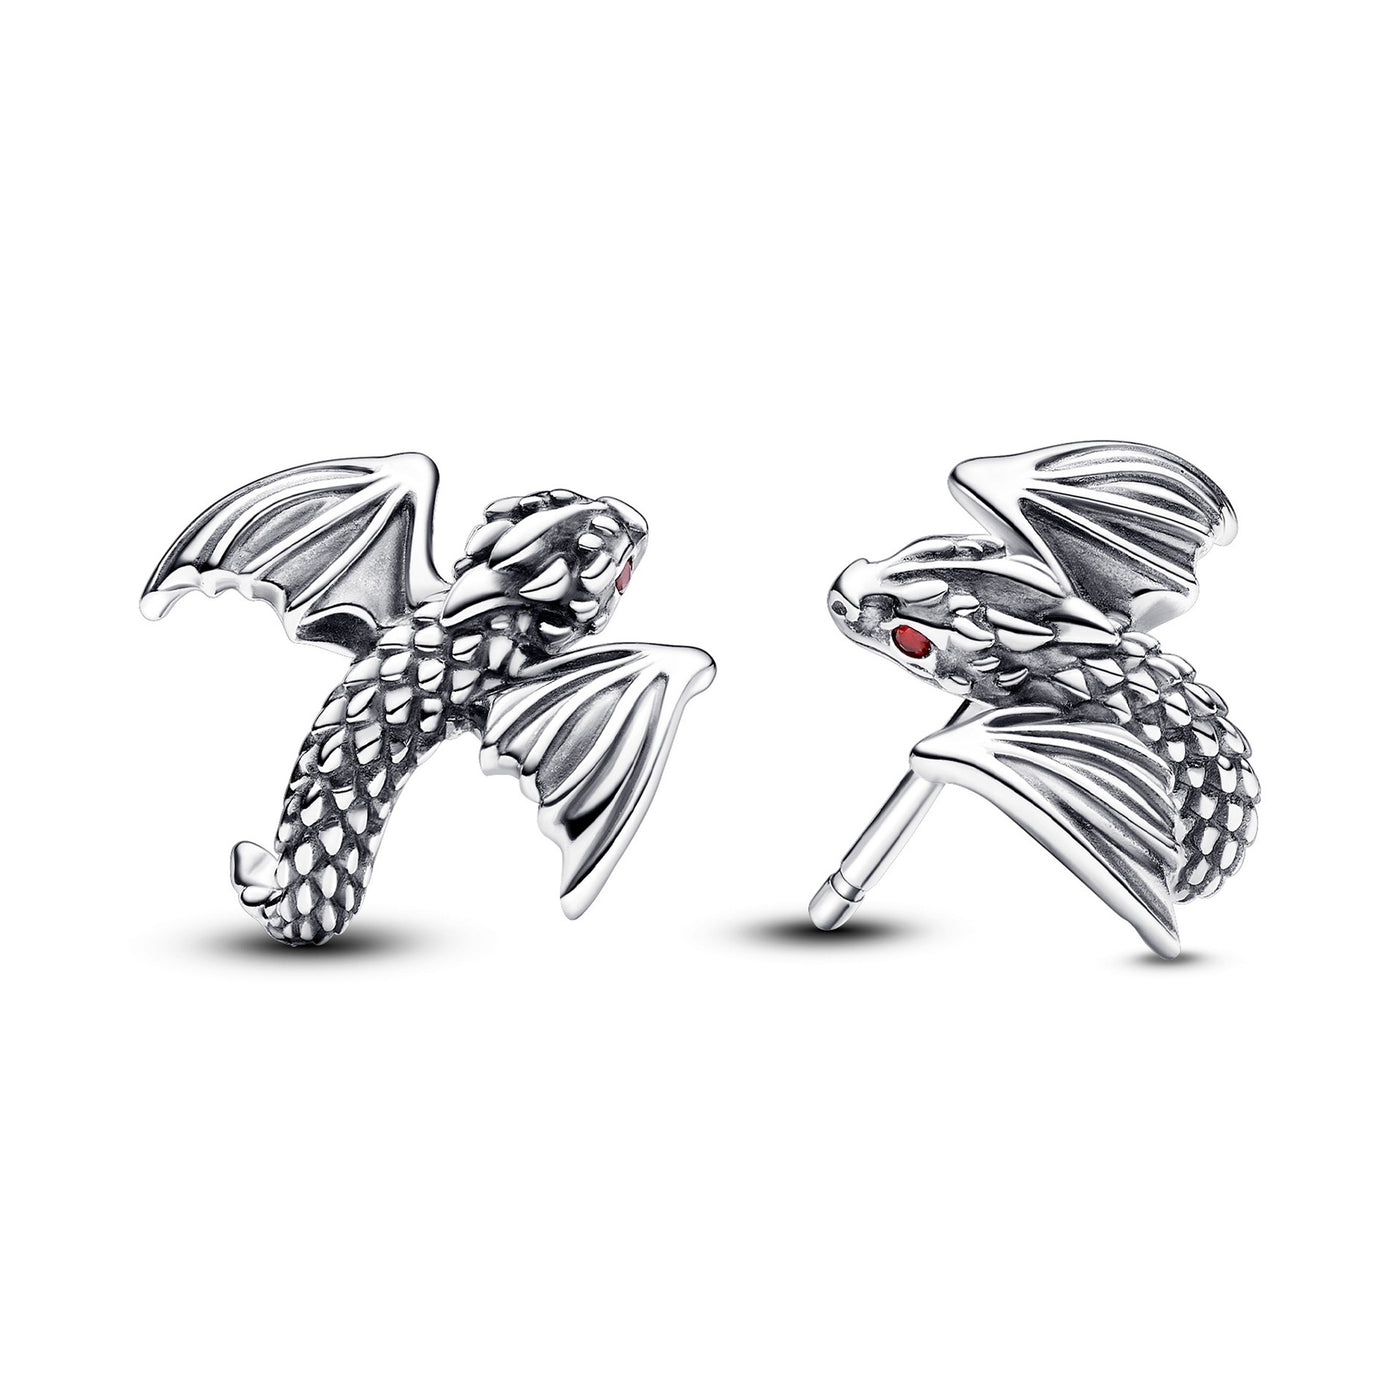 Game of Thrones Curved Dragon Stud Earrings